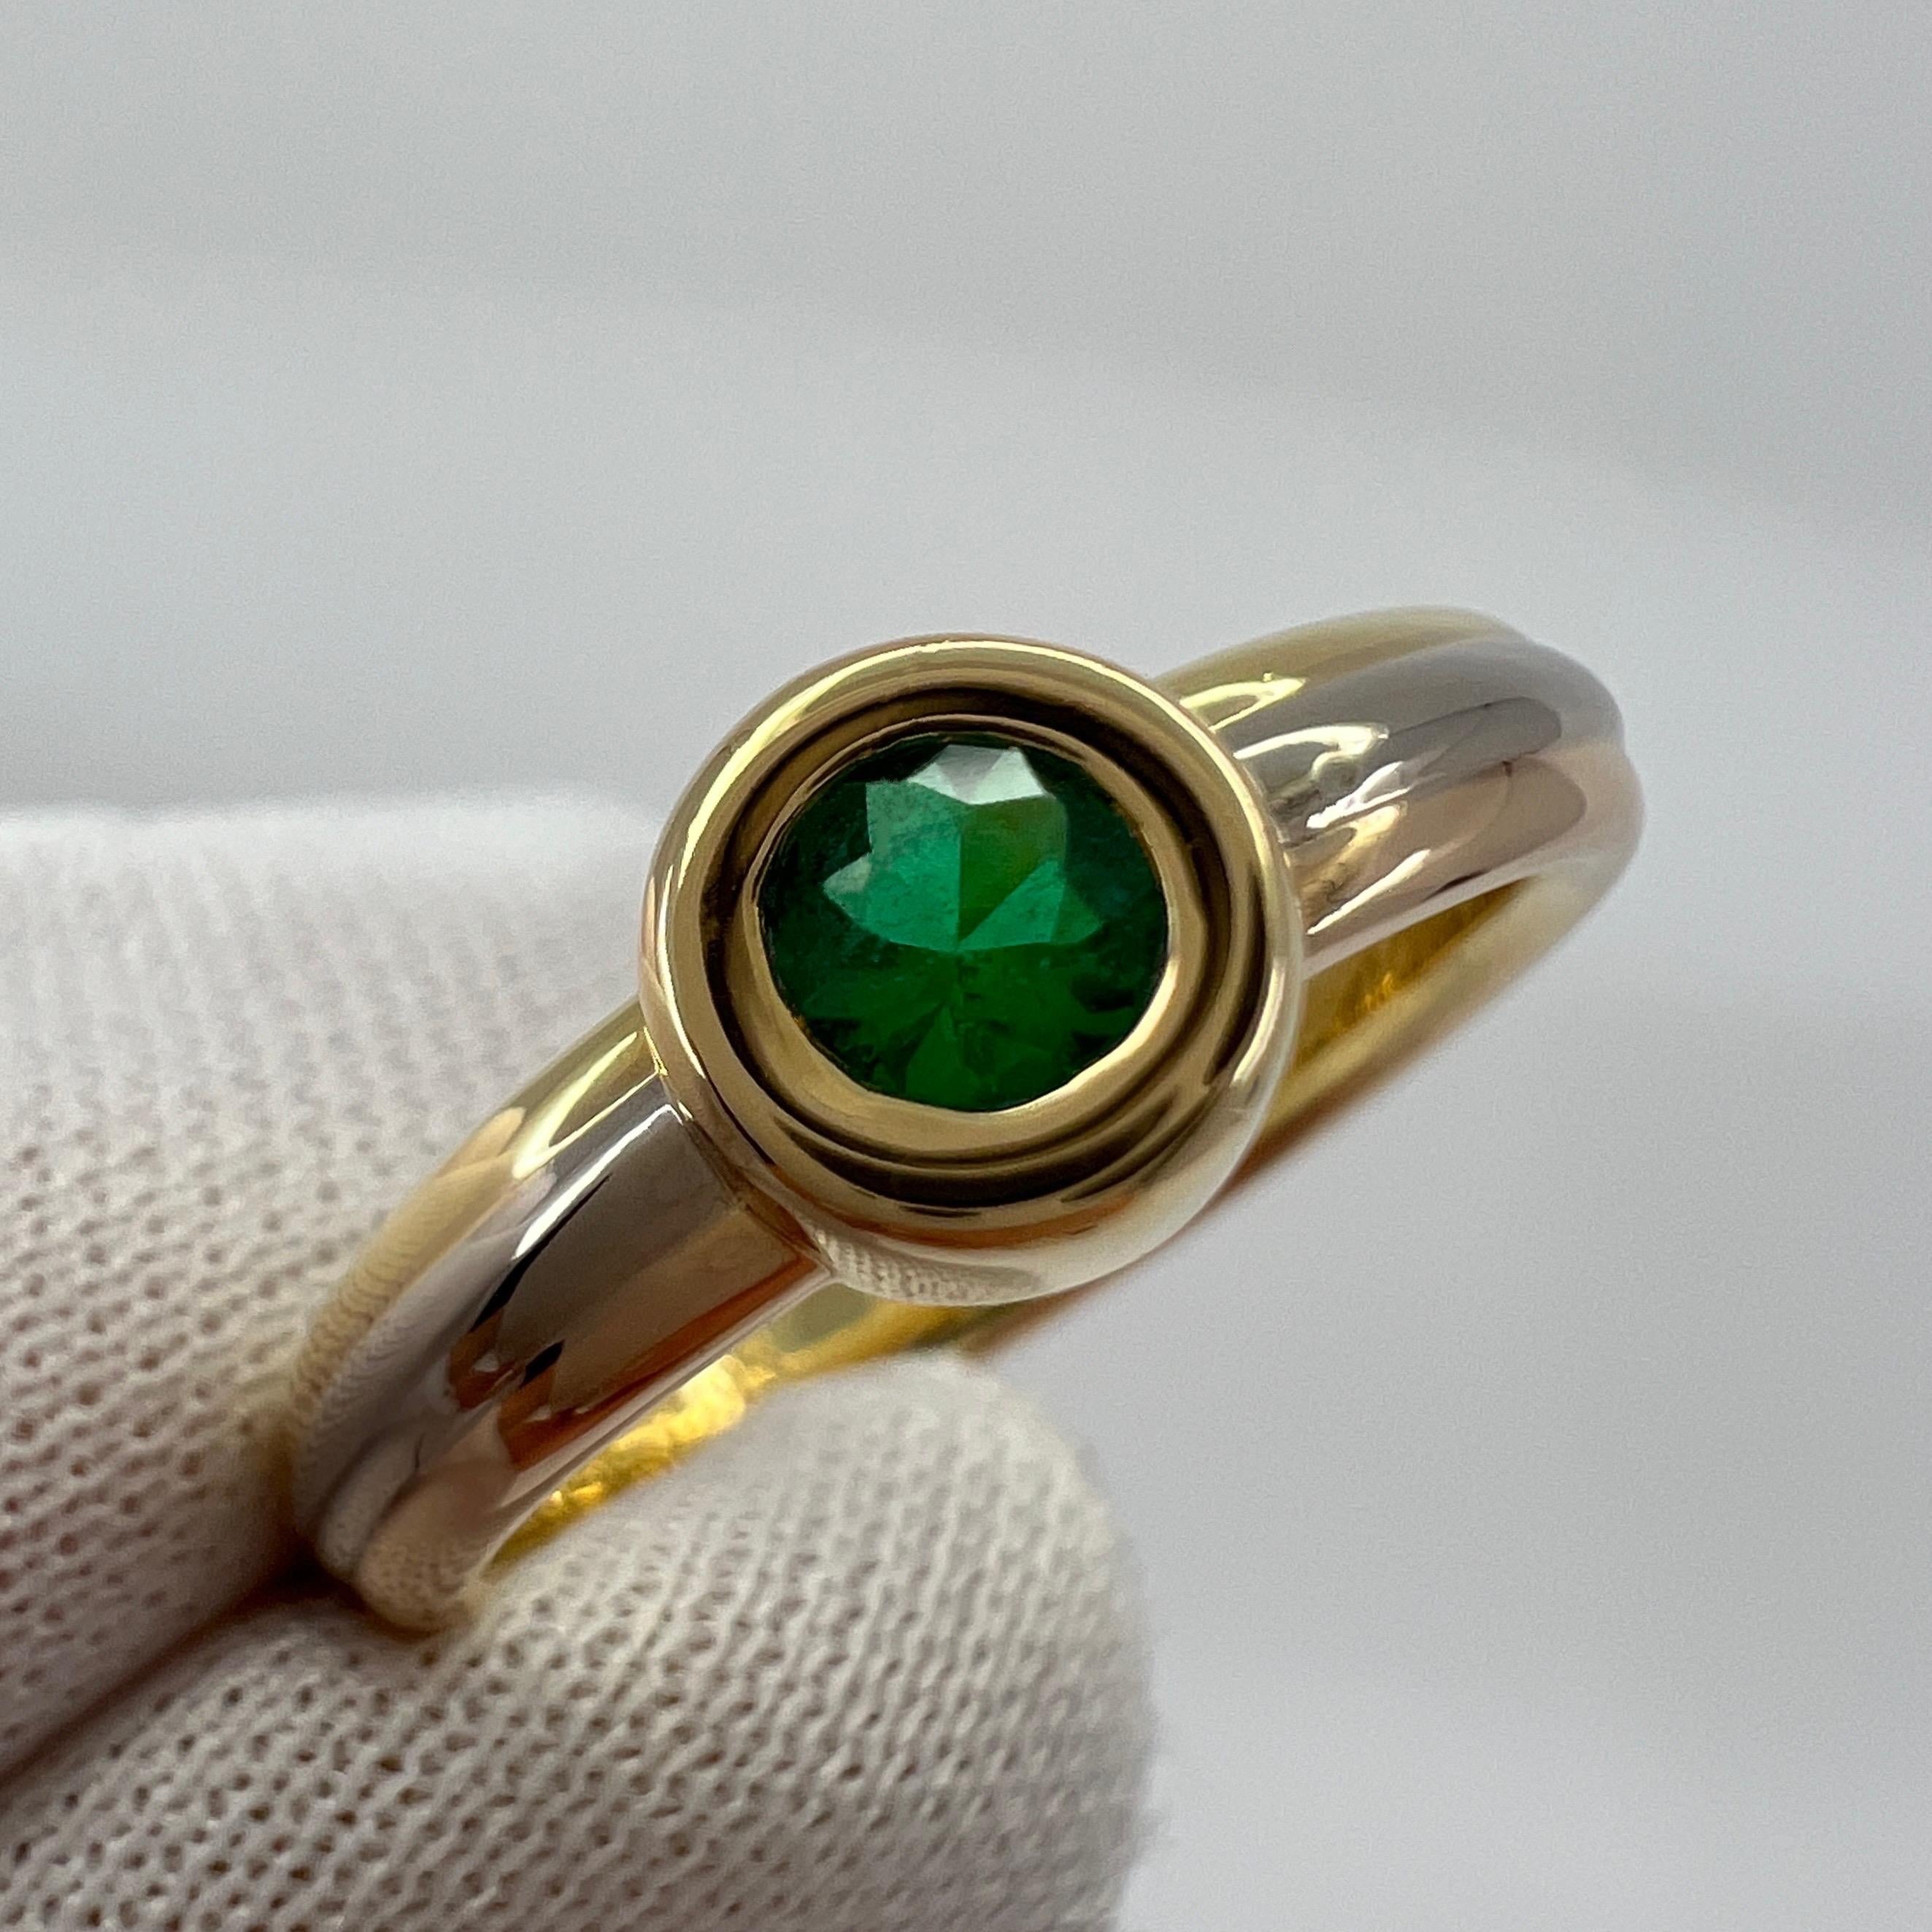 Vintage Cartier Round Cut Emerald 18k Tri Colour/Multi Tone Gold Solitaire Ring.

Stunning multi tone gold ring set with a fine vivid green emerald. Fine jewellery houses like Cartier only use the finest of gemstones and this emerald is no